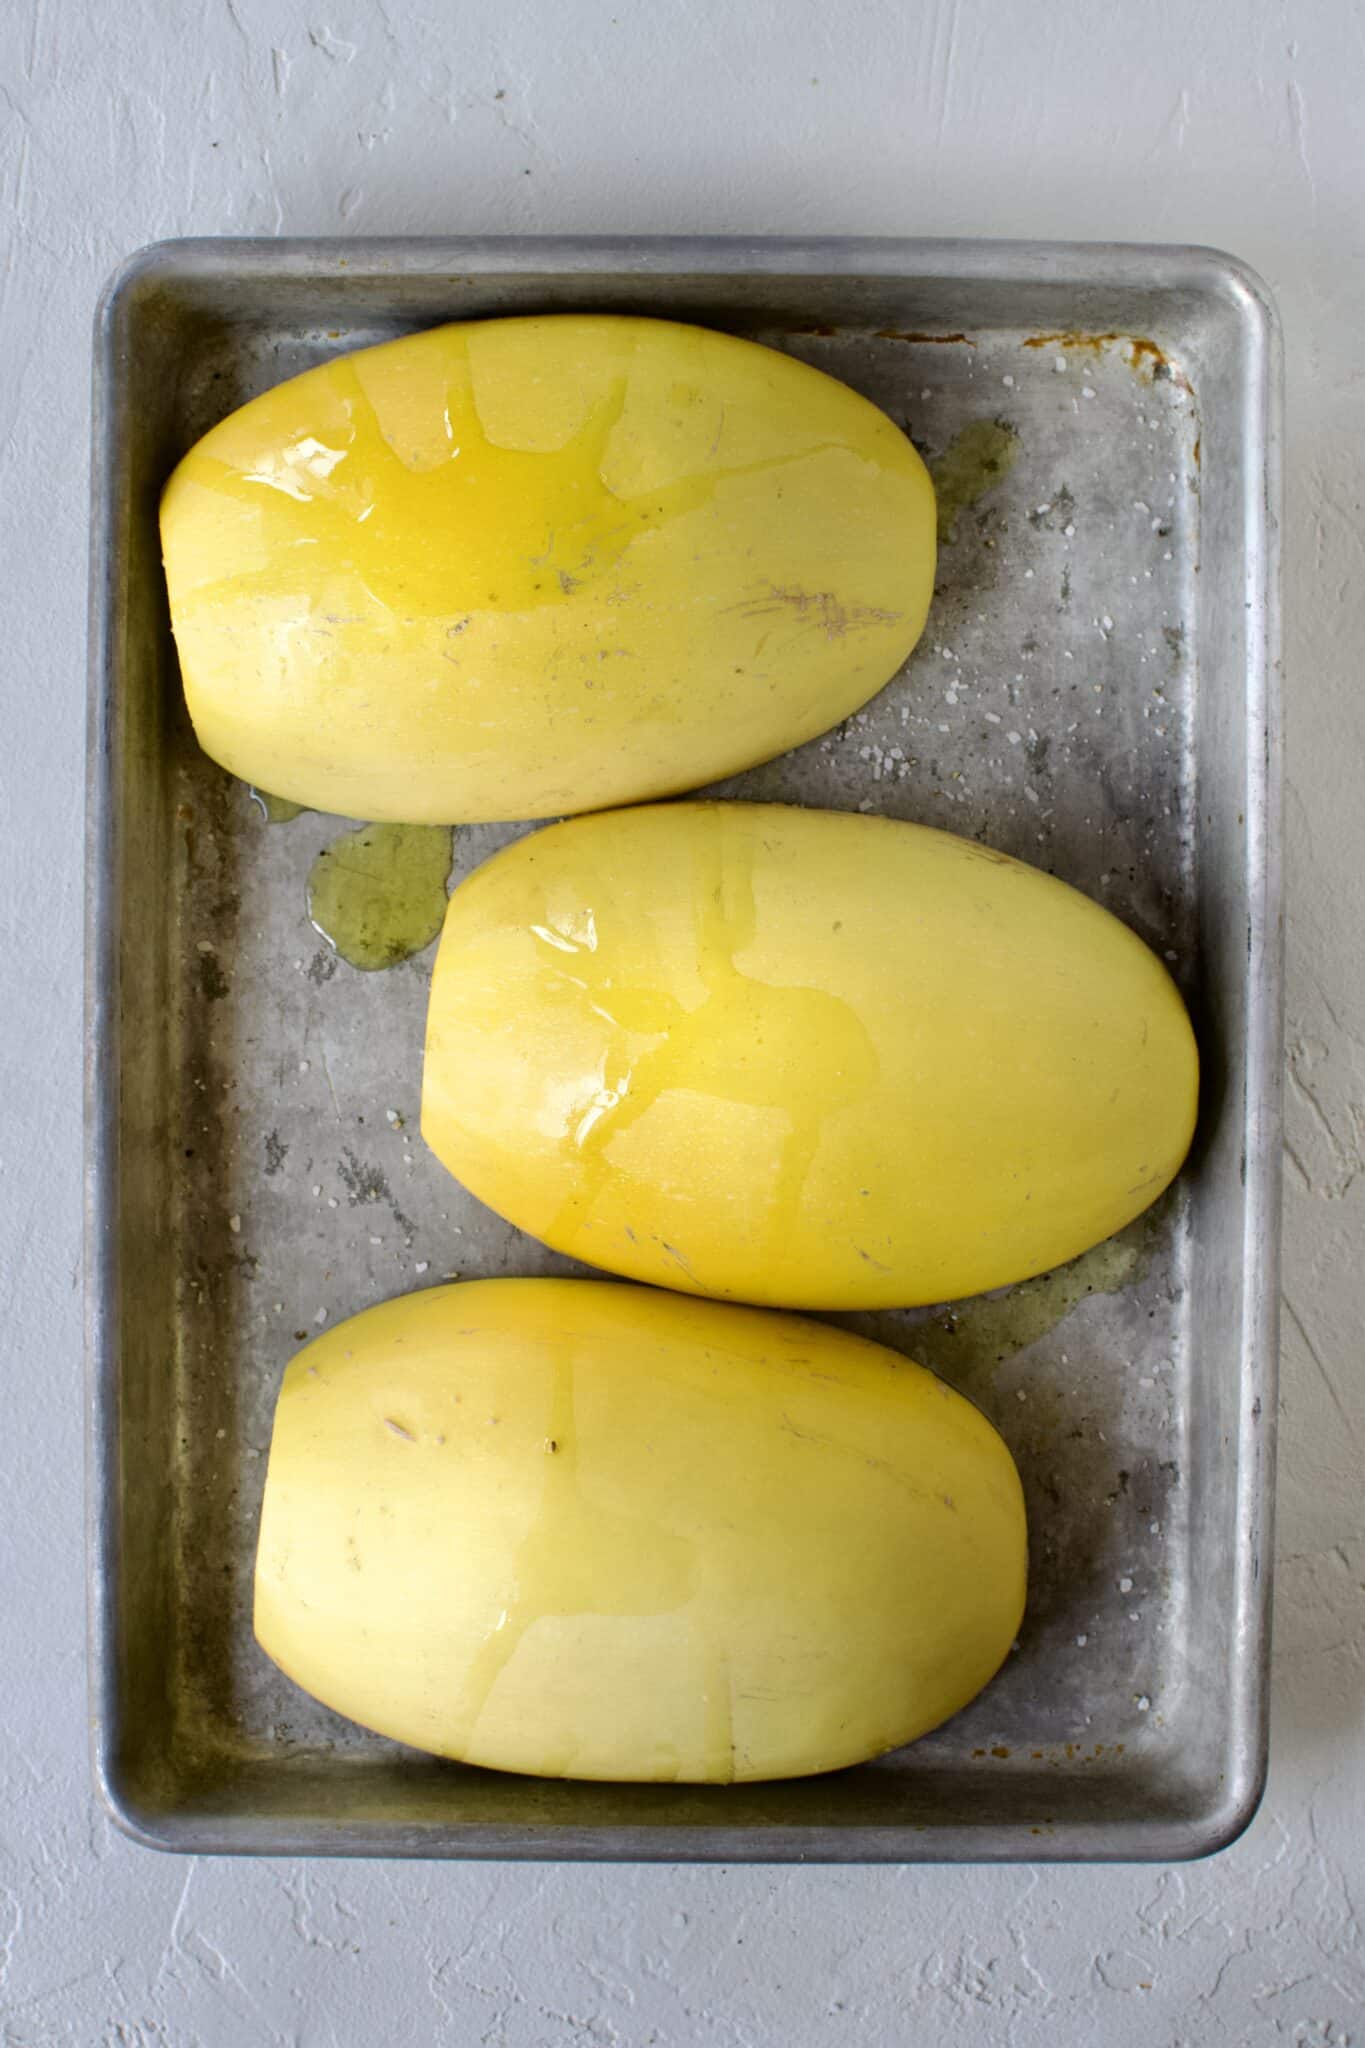 Spaghetti Squash, cut side down, seeds removed, placed on a sheet pan and seasoned with olive oil, salt, and pepper, ready to roast.